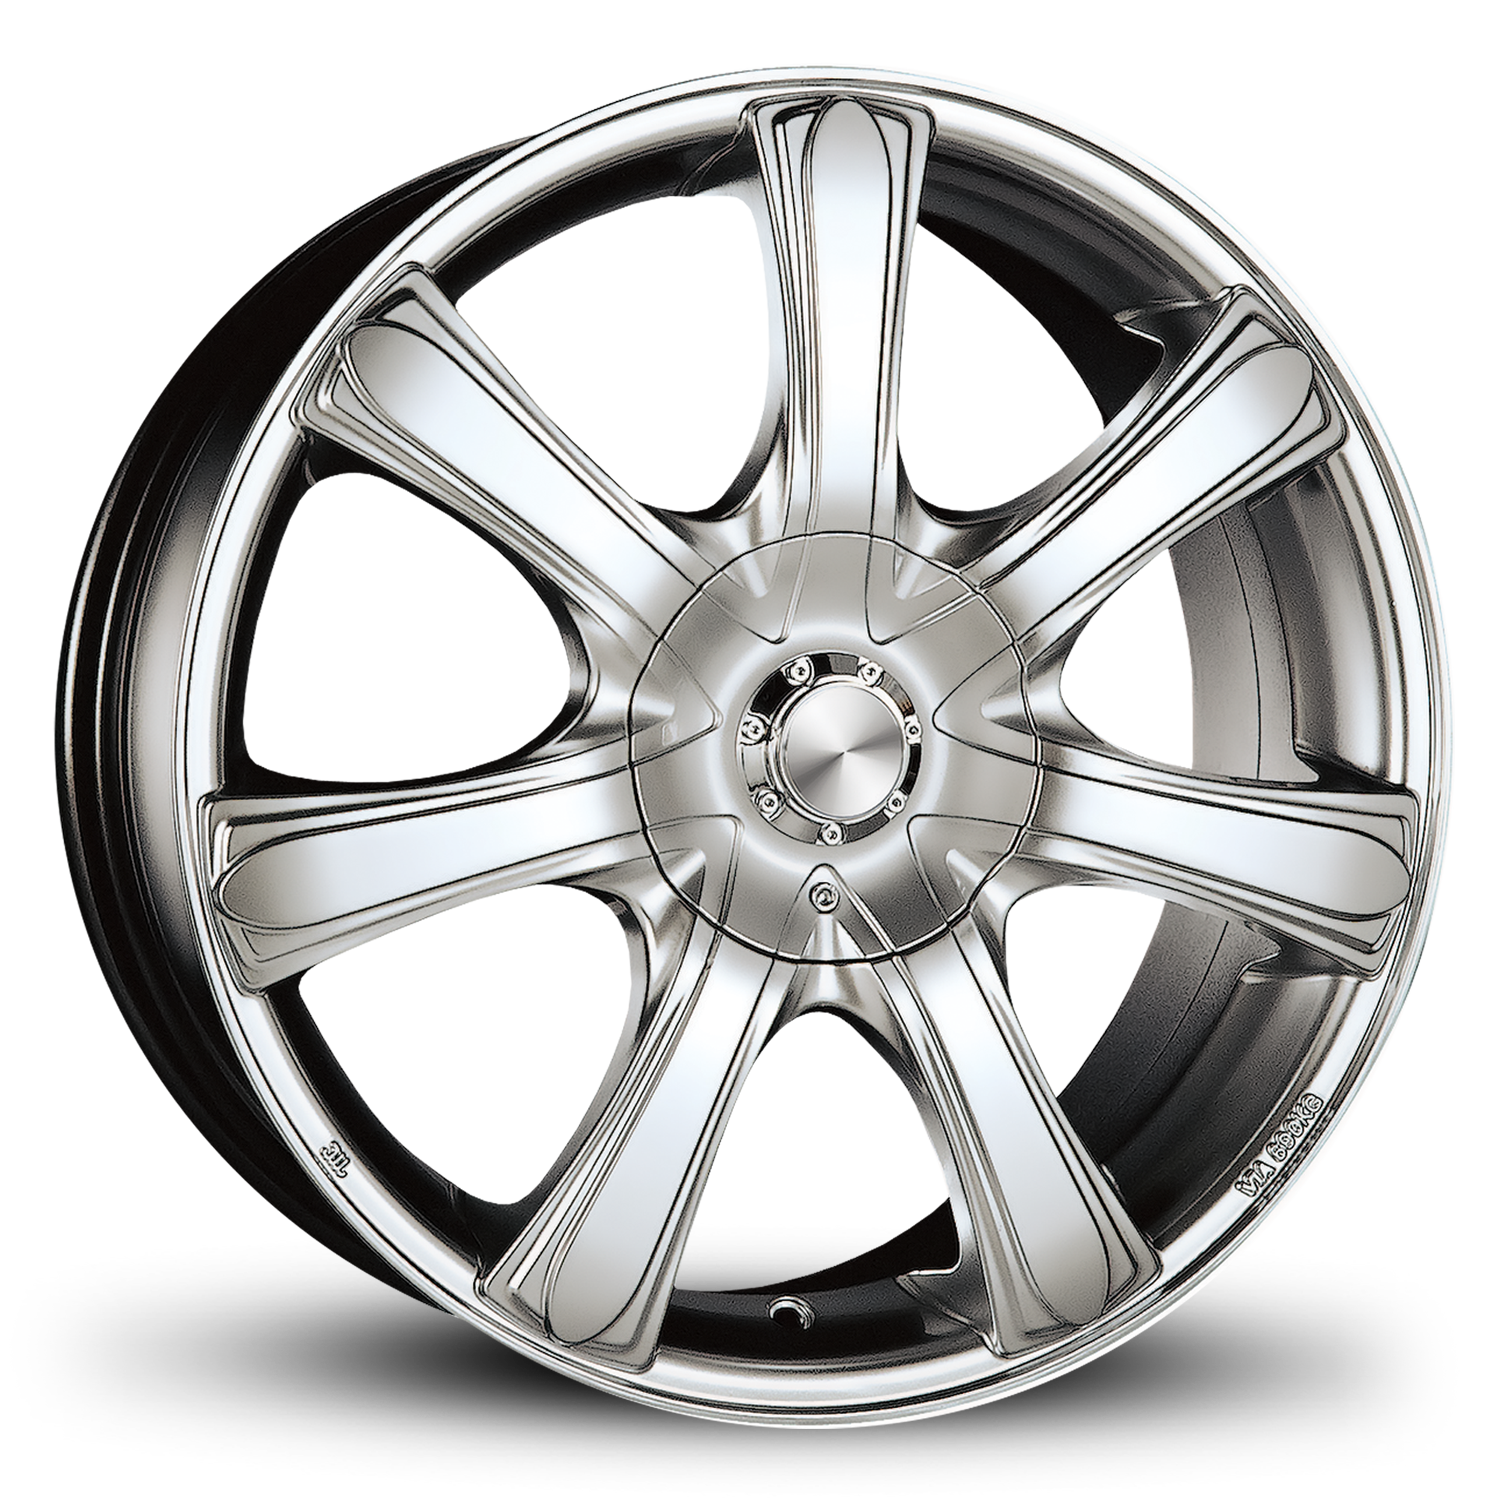 Buy Replacement Center Caps for the HD Wheels Storm 7 Storm VII Wheel Rims